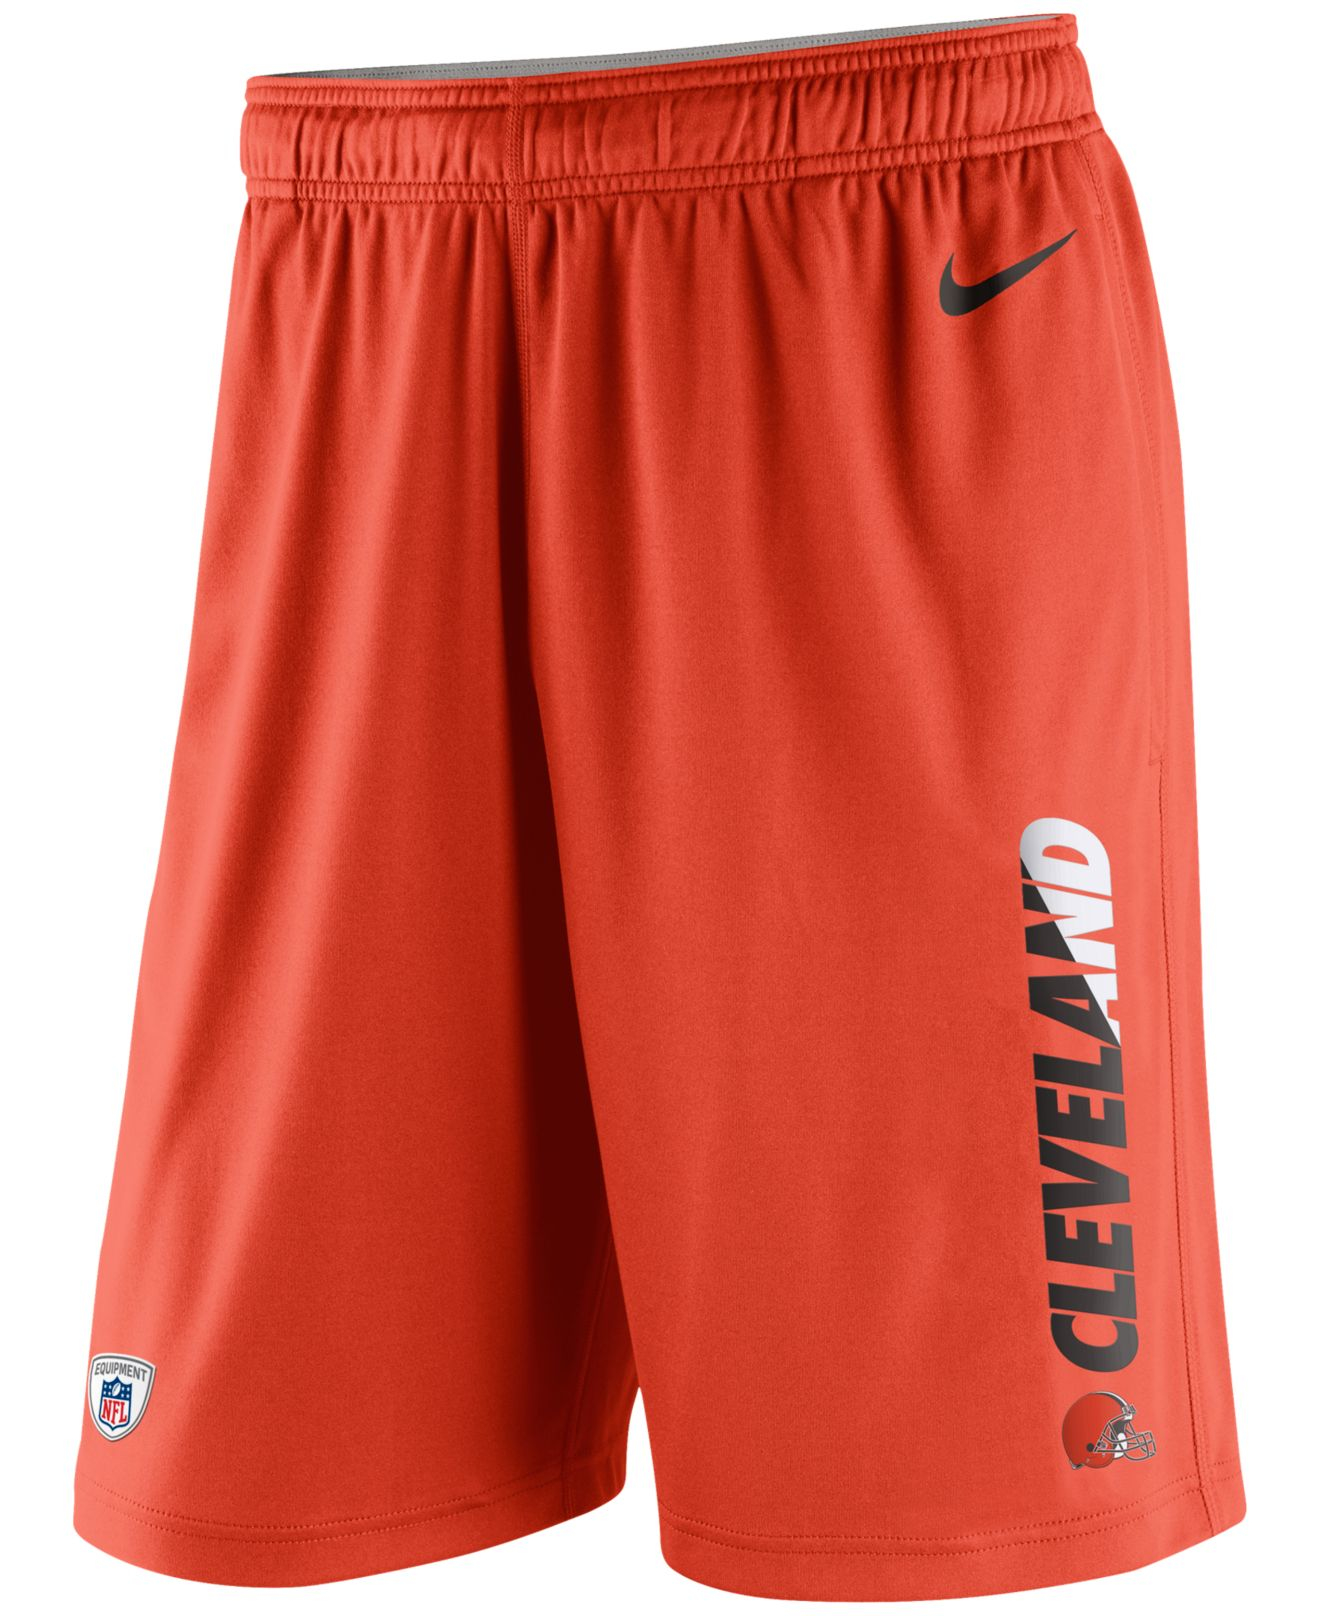 Lyst - Nike Men's Cleveland Browns Practice Fly 3.0 Dri-fit Shorts in ...